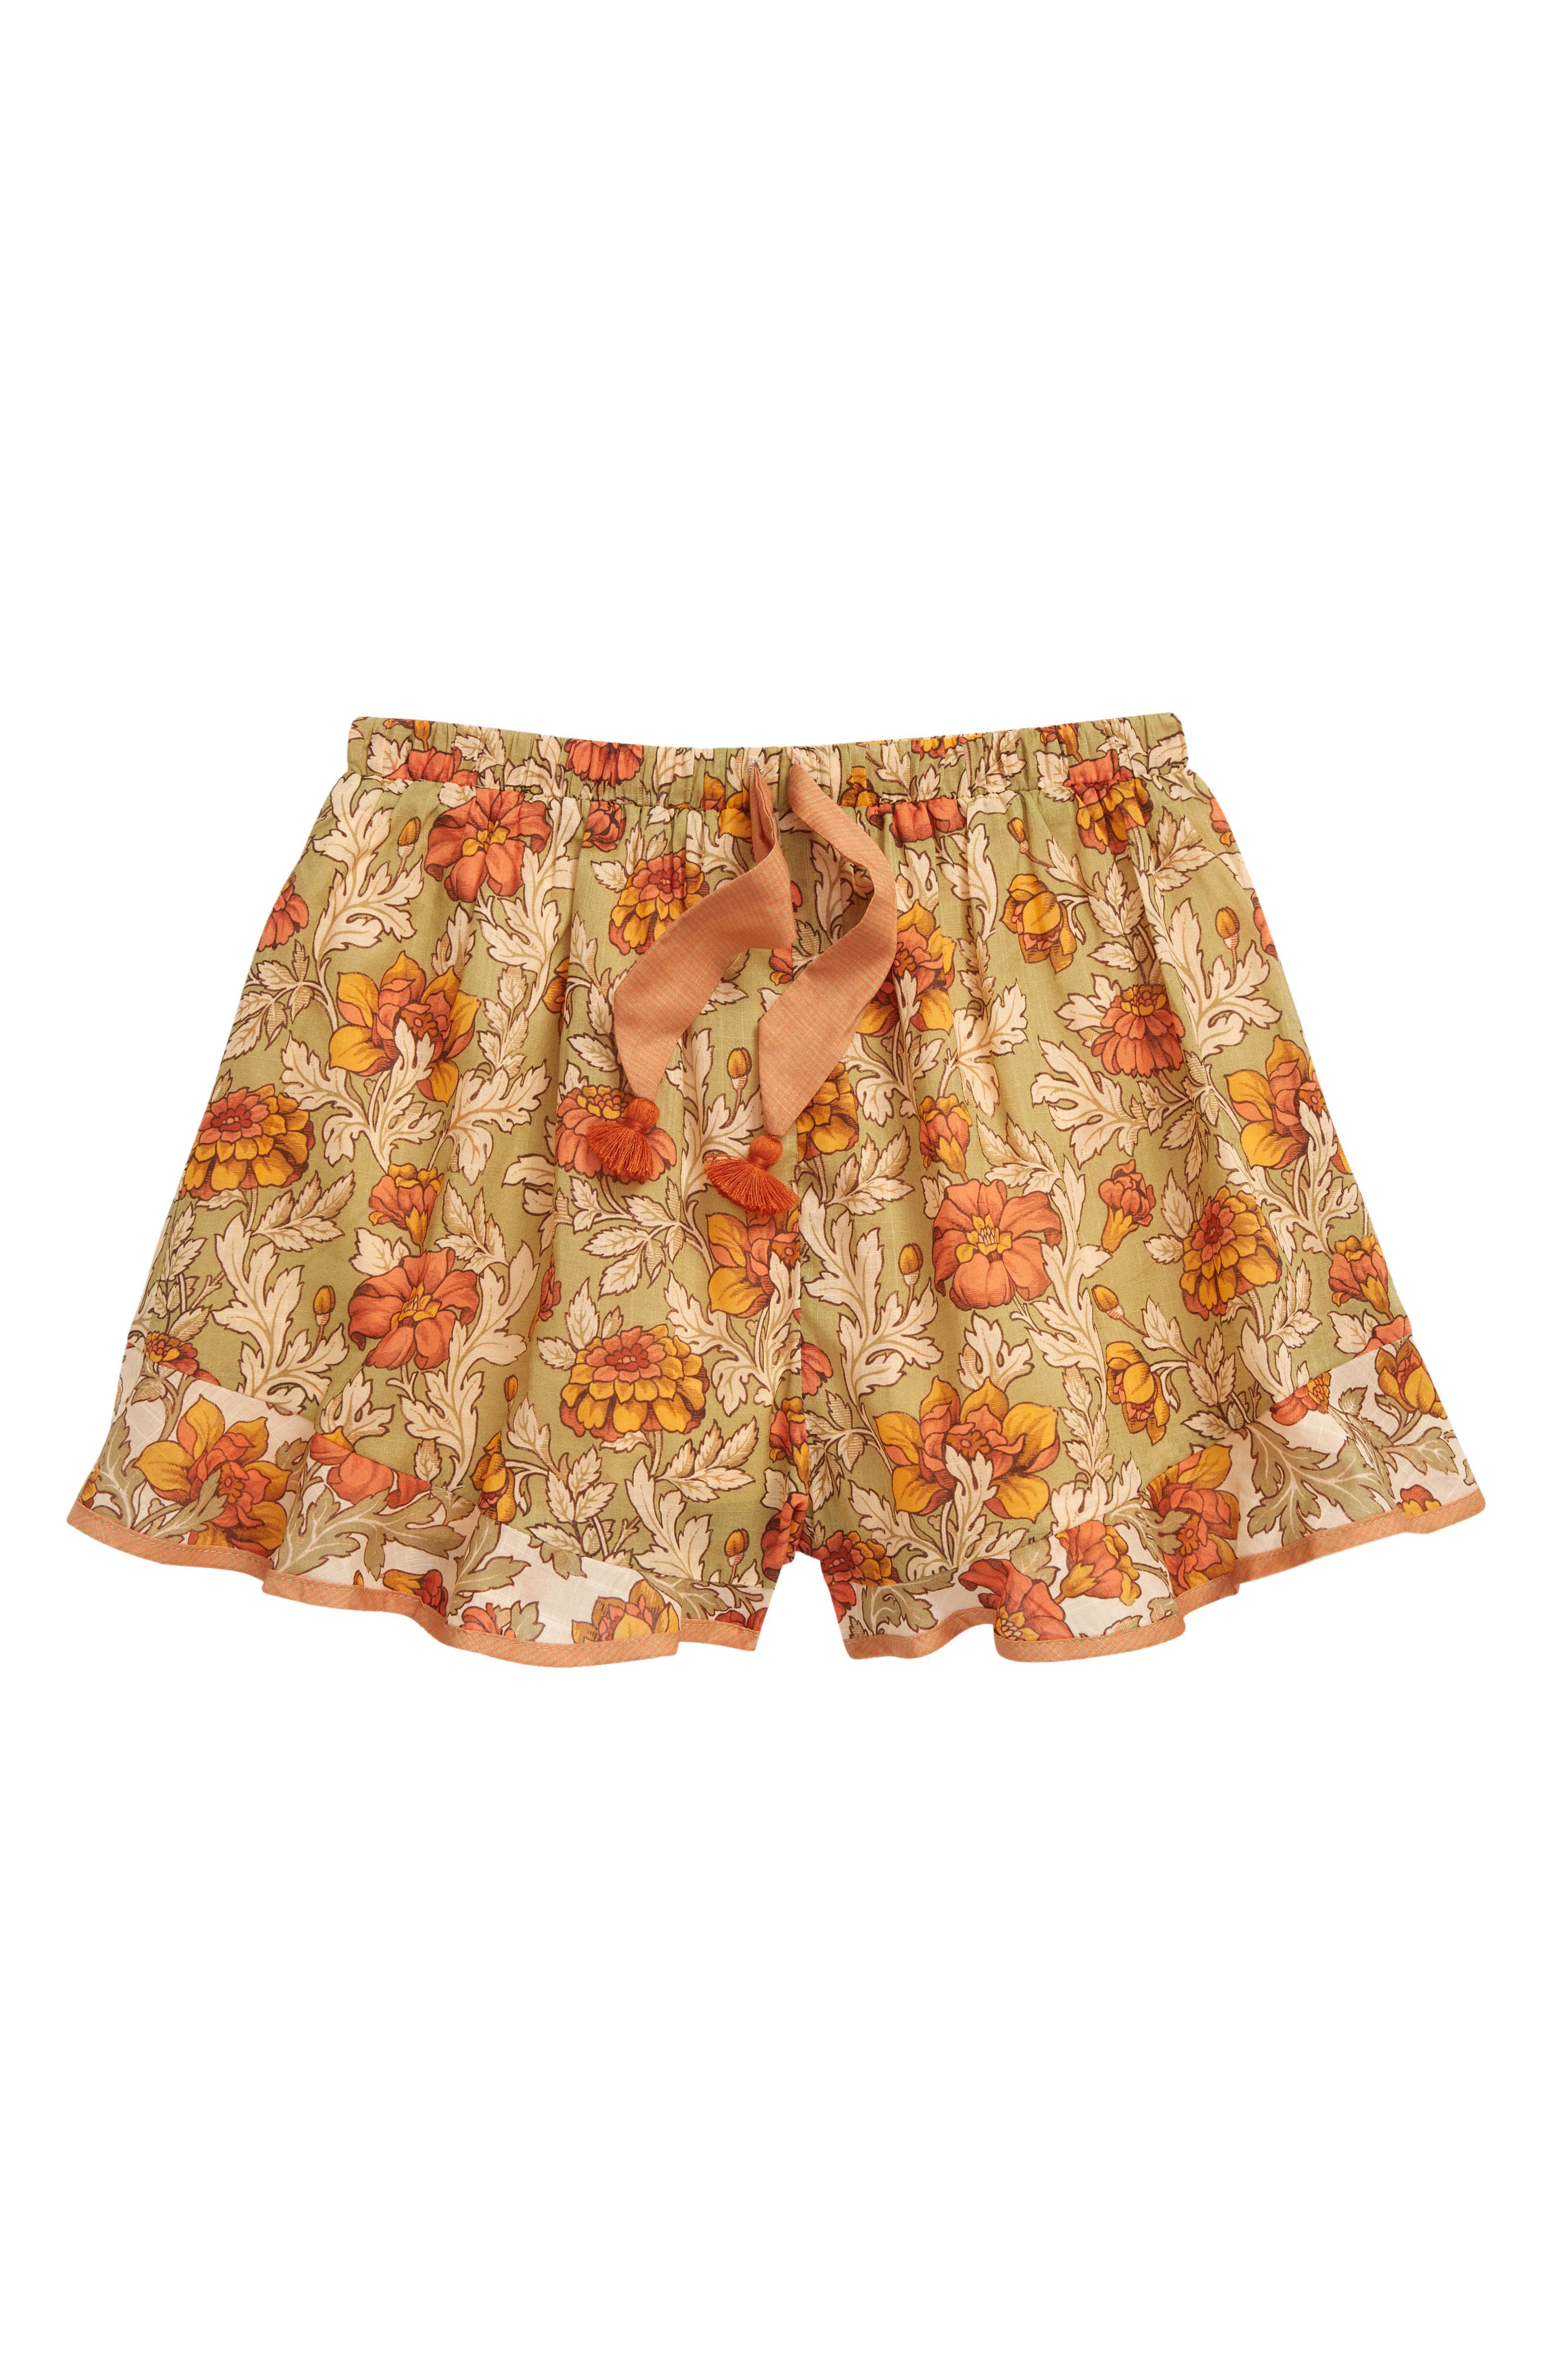 Zimmermann Kids' Andie Floral Ruffle Trim Cotton Shorts in Sage Floral at Nordstrom, Size 1Y Us